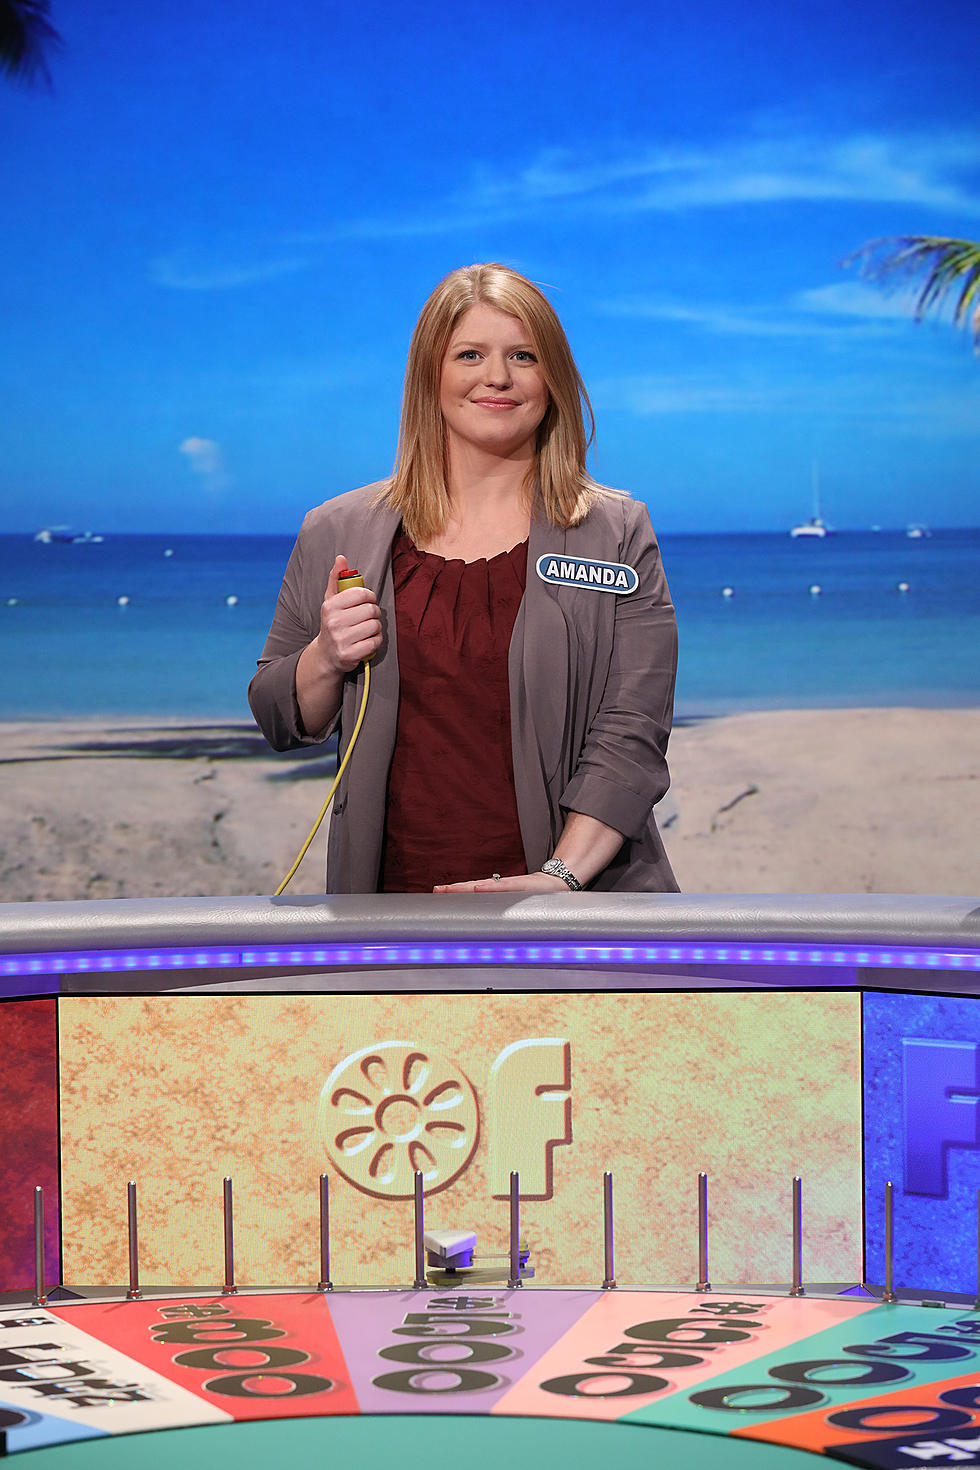 Wyoming Woman Wins On Wheel of Fortune